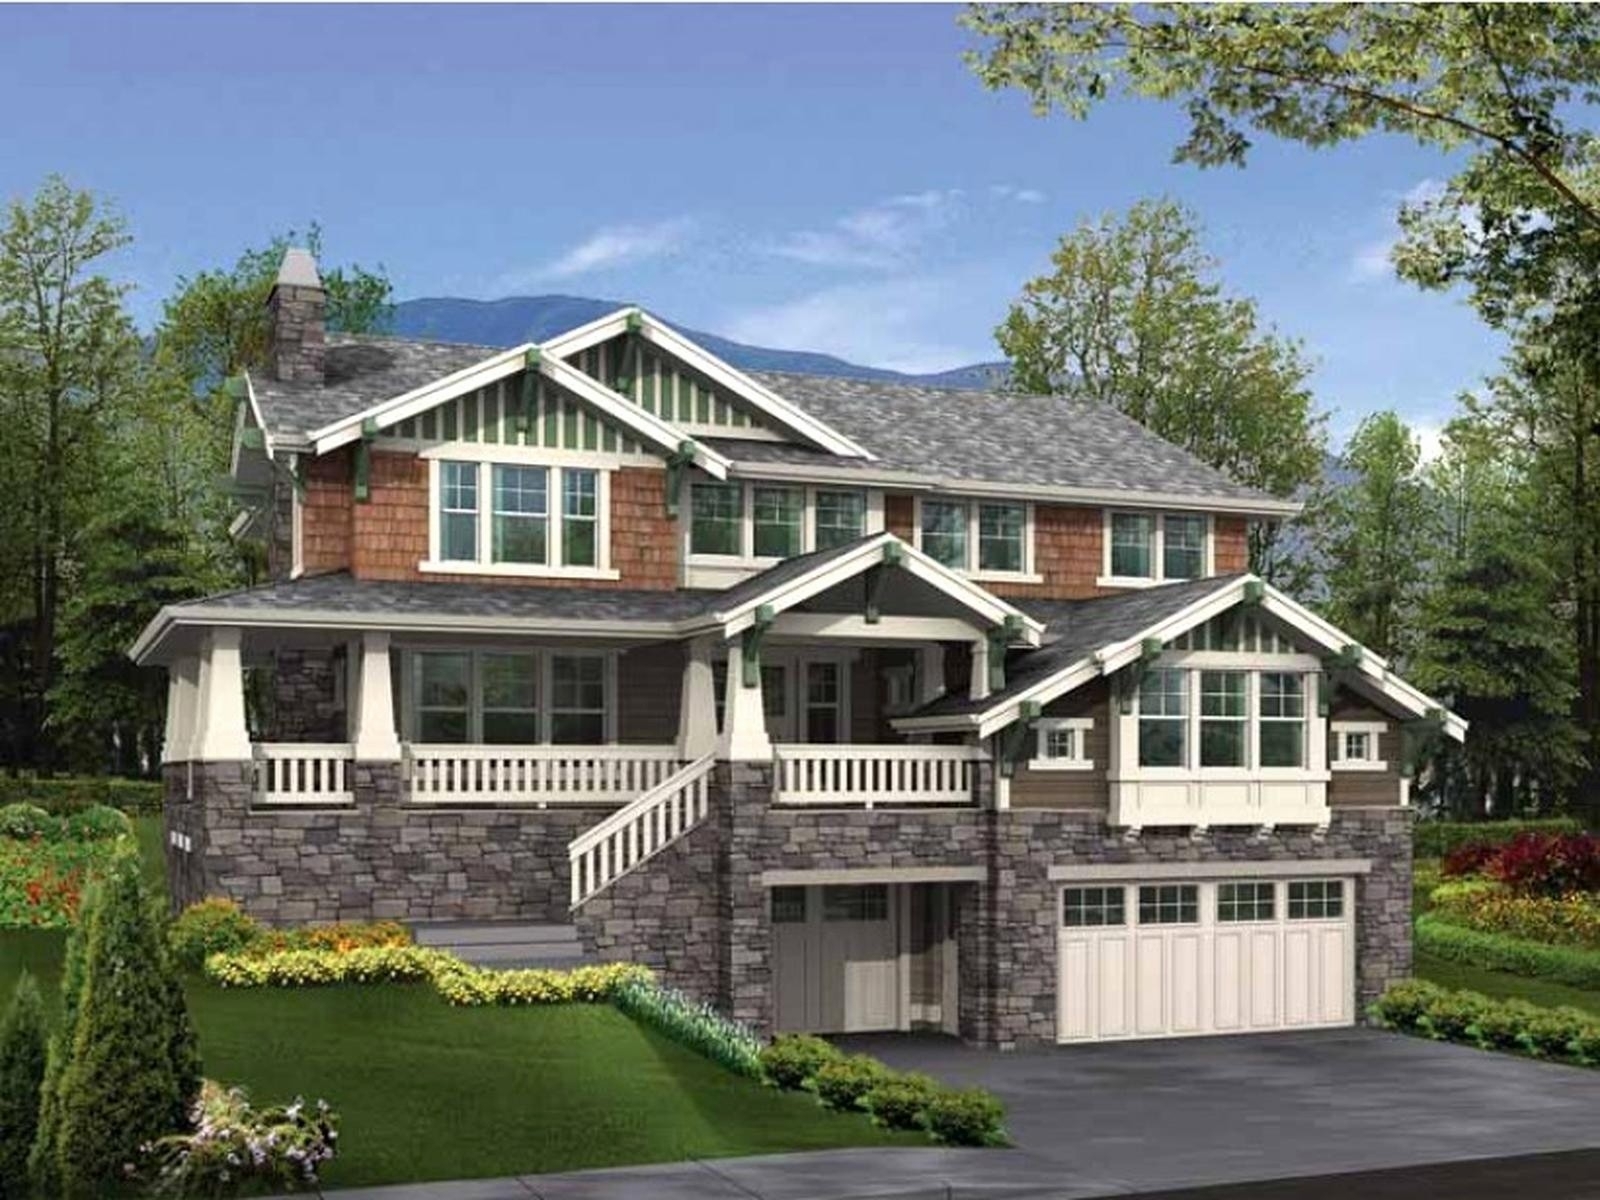 Narrow Lakefront Home Plans